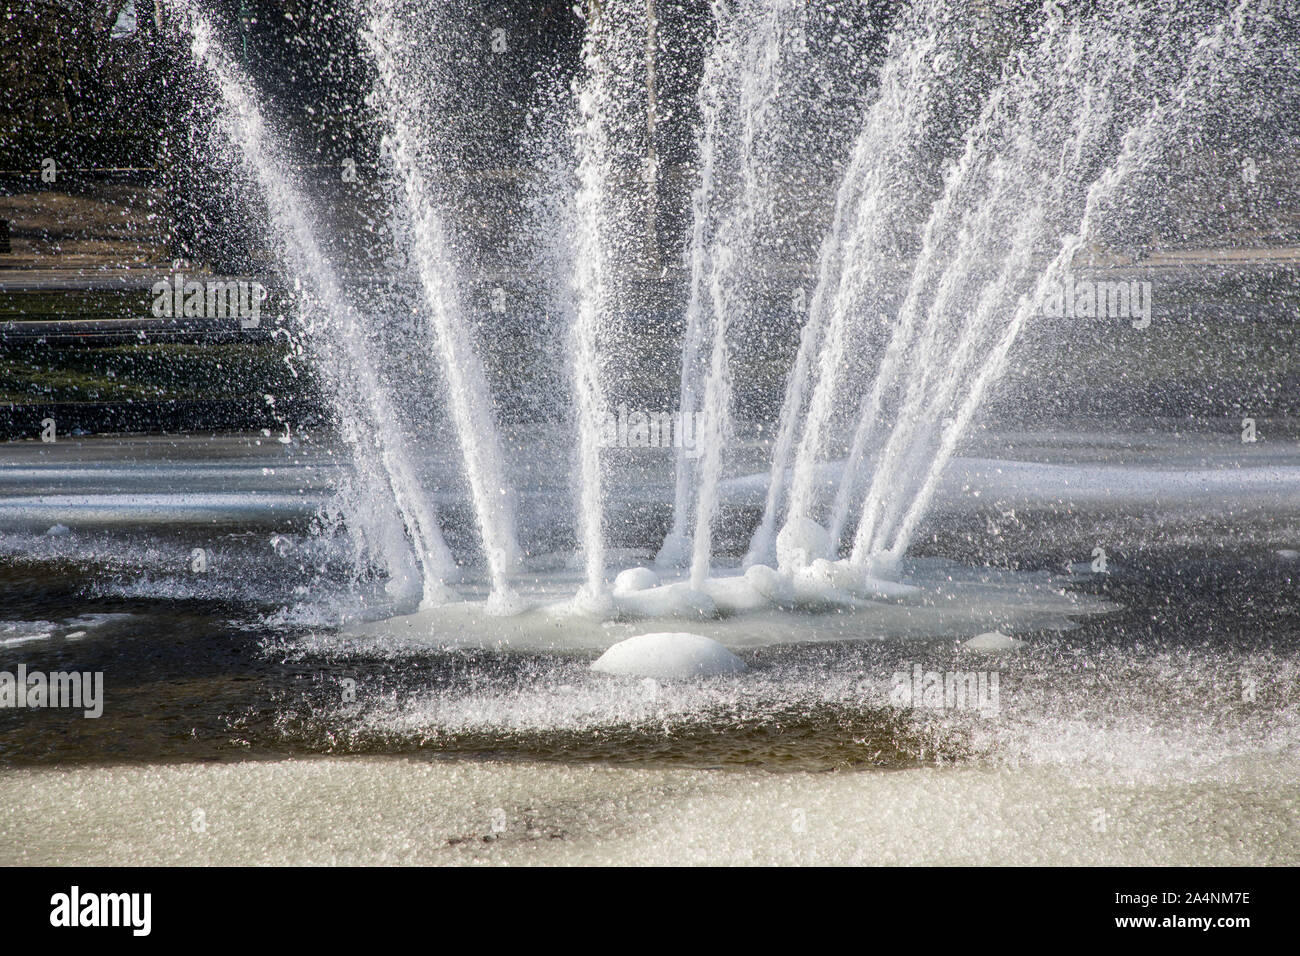 Fountain, water fountain, winter, partly frozen water at minus temperatures, Stock Photo